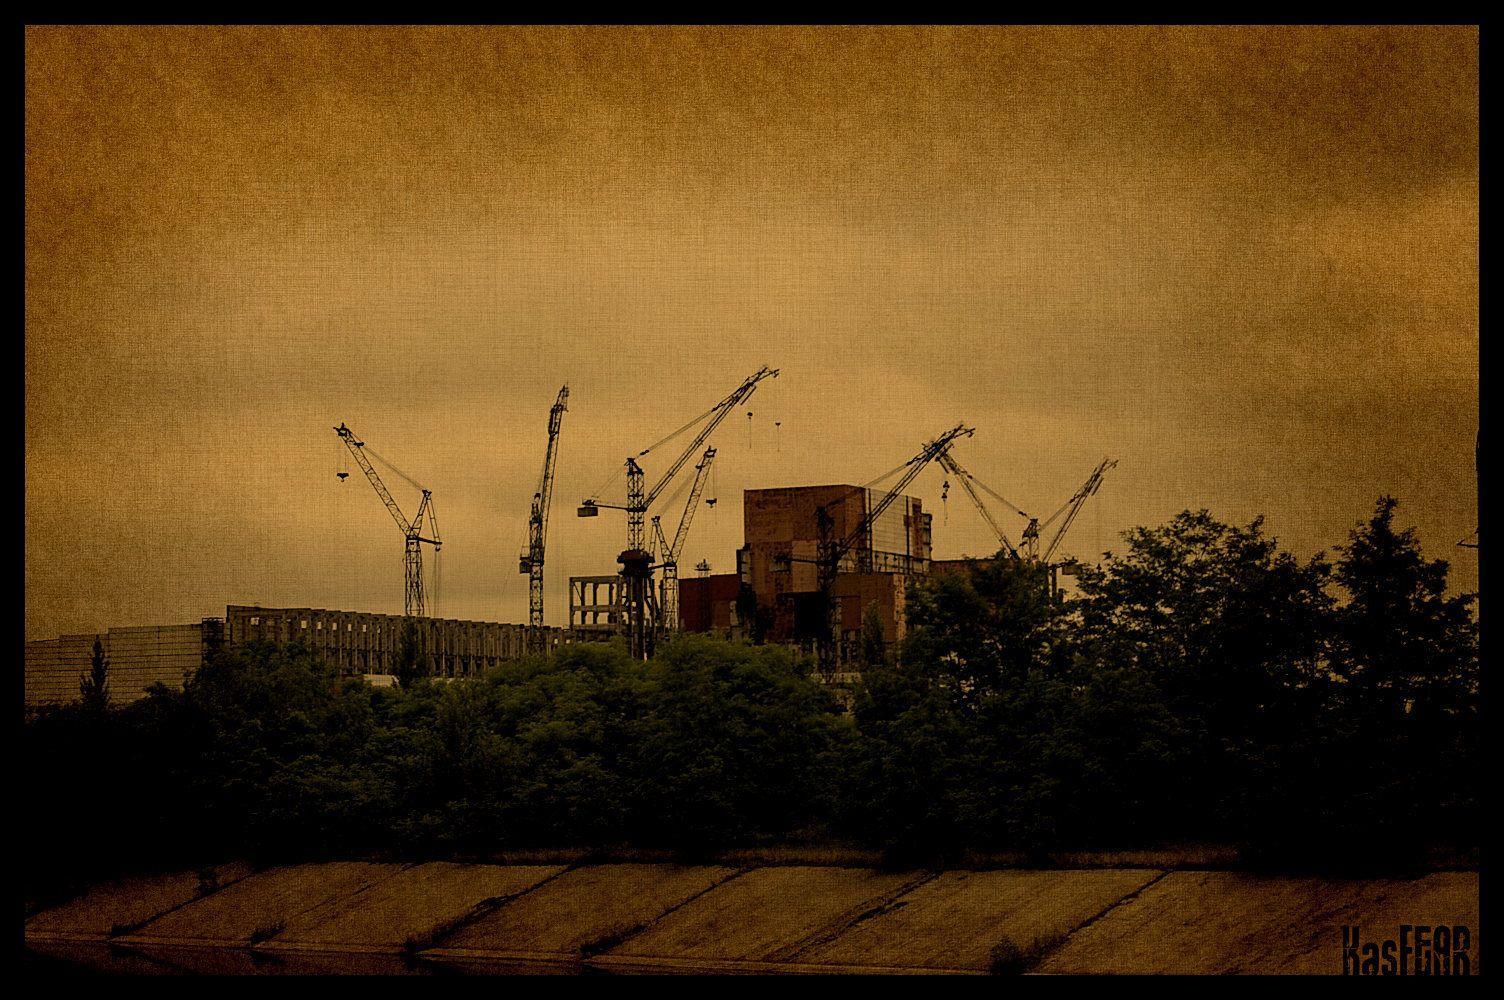 Roseannah&;s Designs: Chernobyl Ad Campaign image: Chernobyl